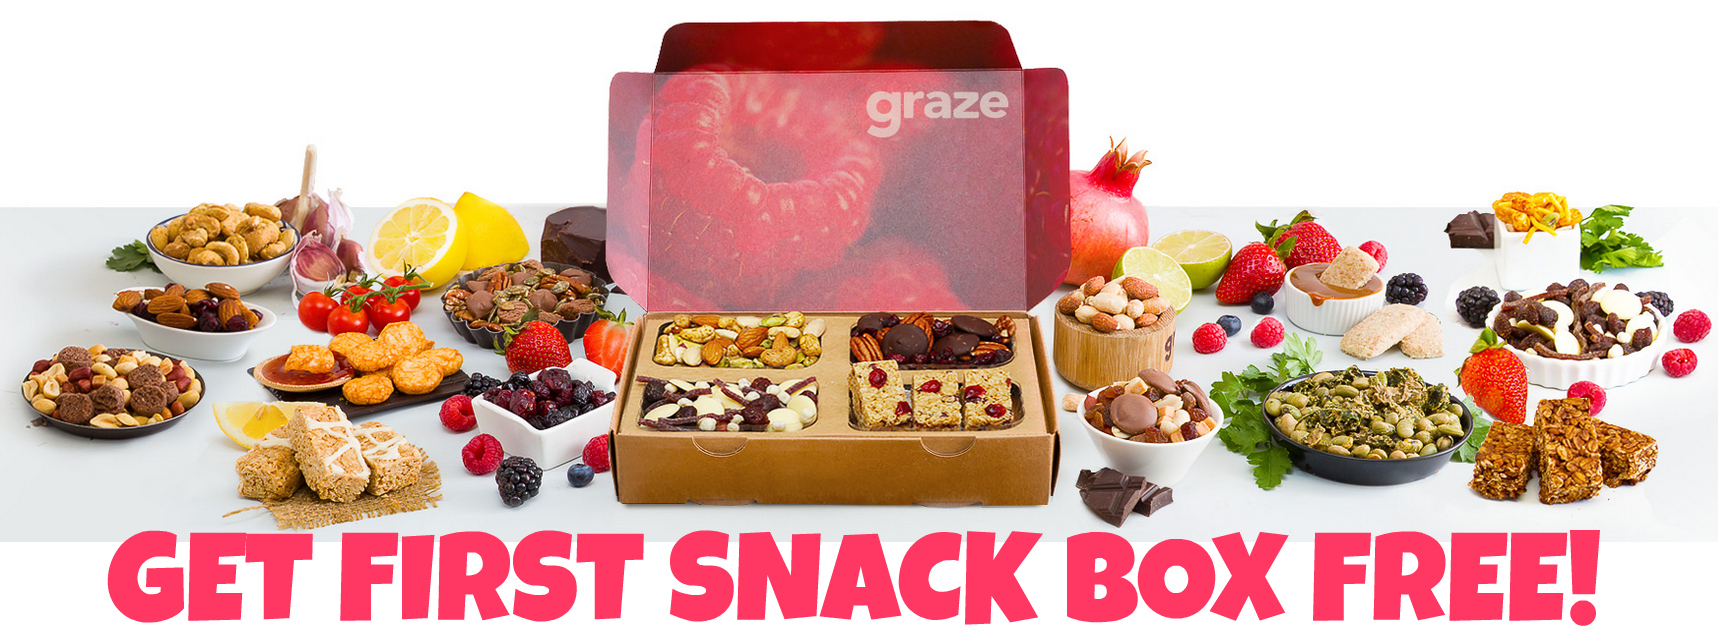 FREE Snack Box + 1 Shipping Hip2Save